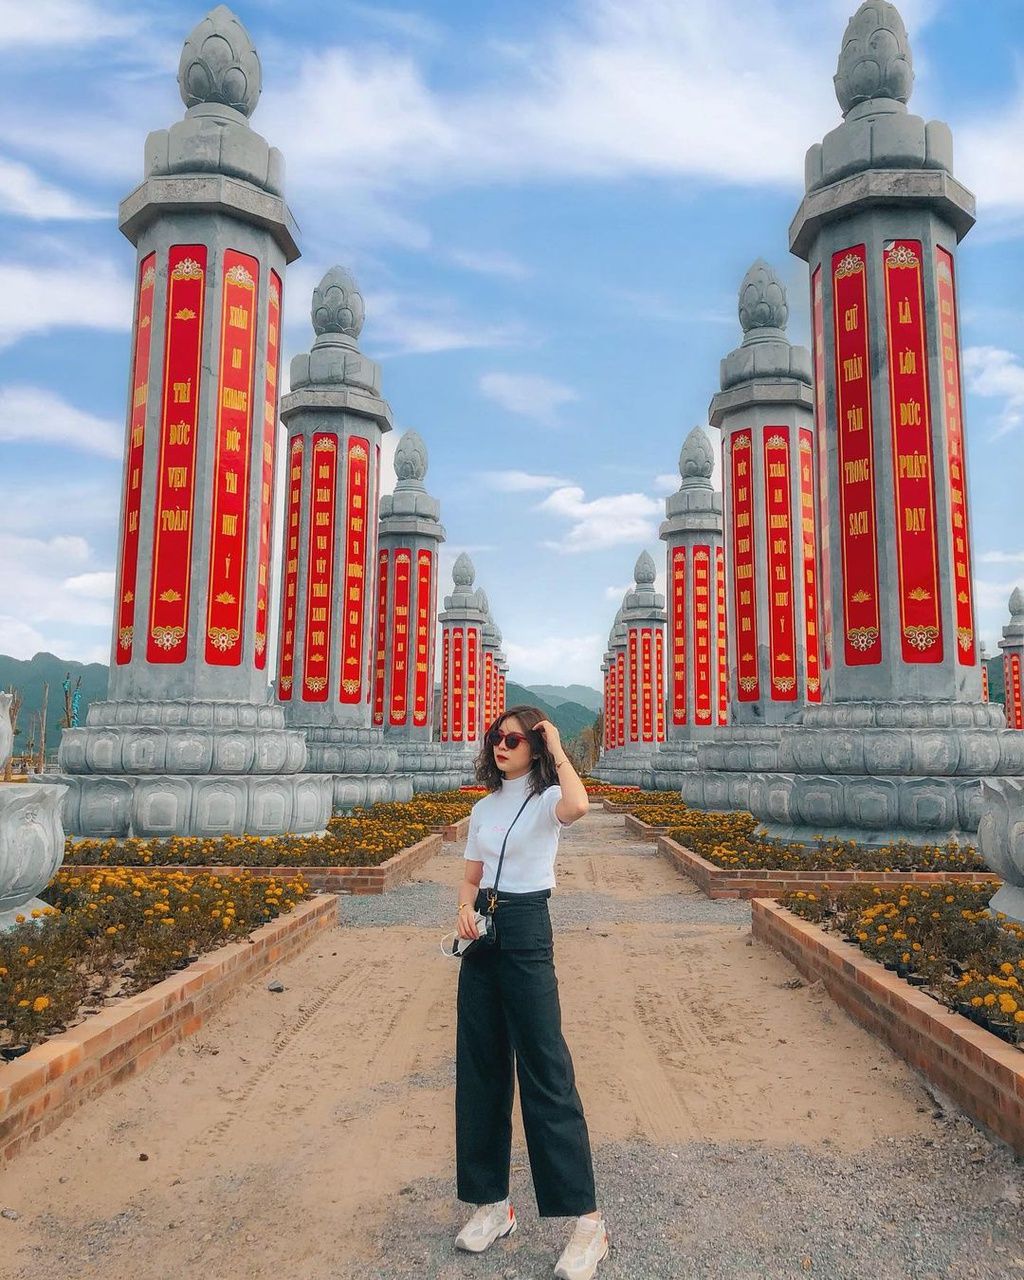 The world’s largest pagoda in Vietnam offers stunning check-in corners